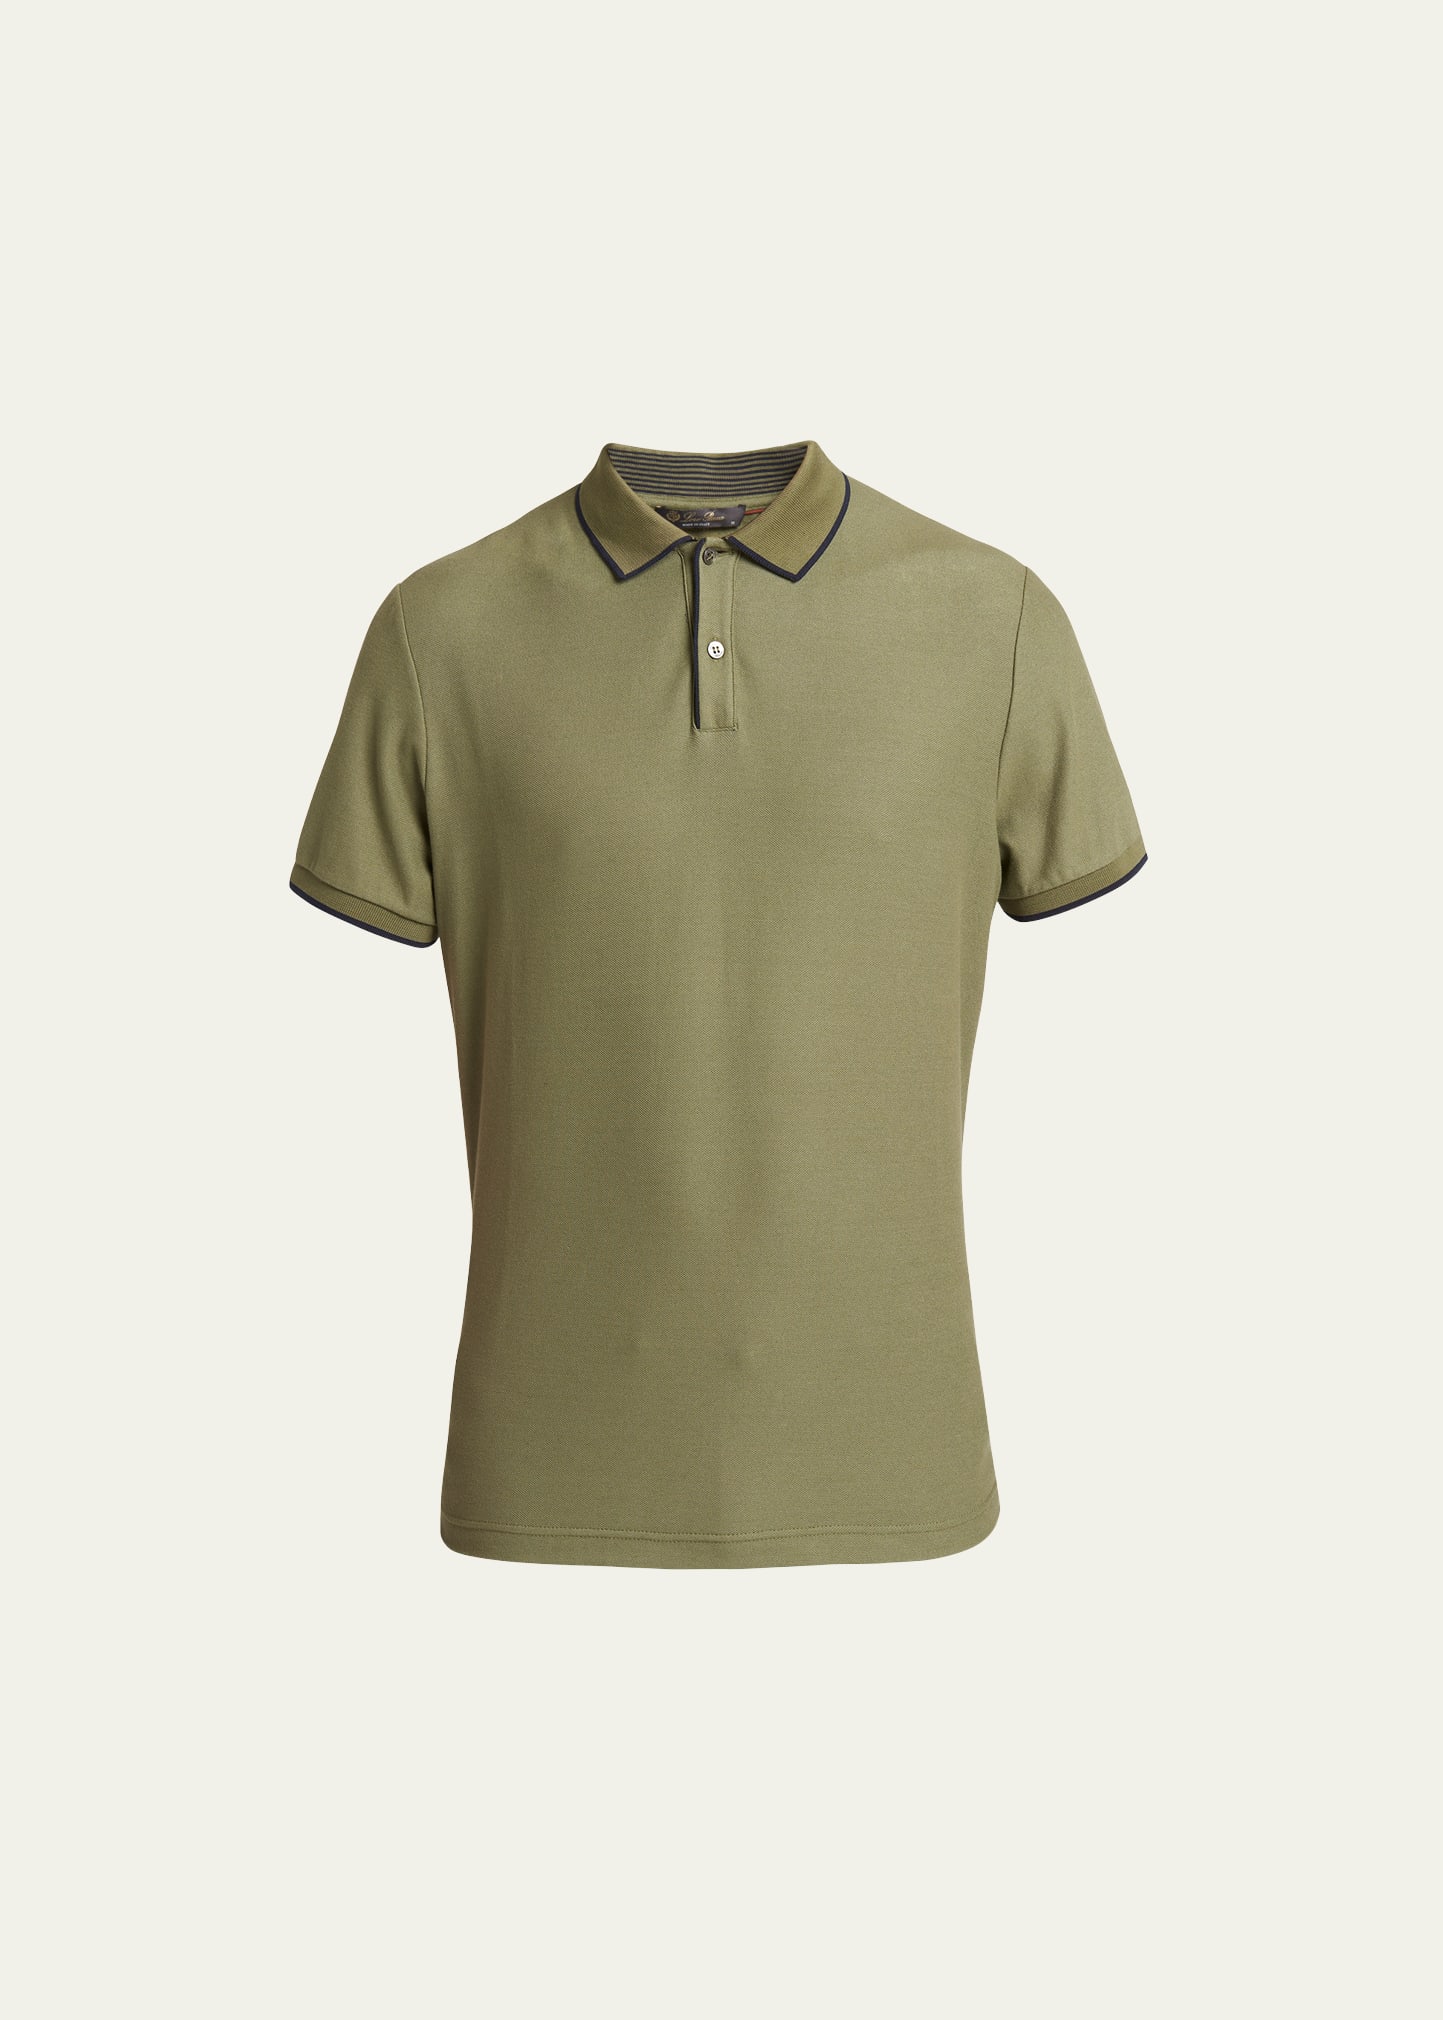 Loro Piana Men's Brentwood Tipped Jersey Pique Polo Shirt In Sagano Forest